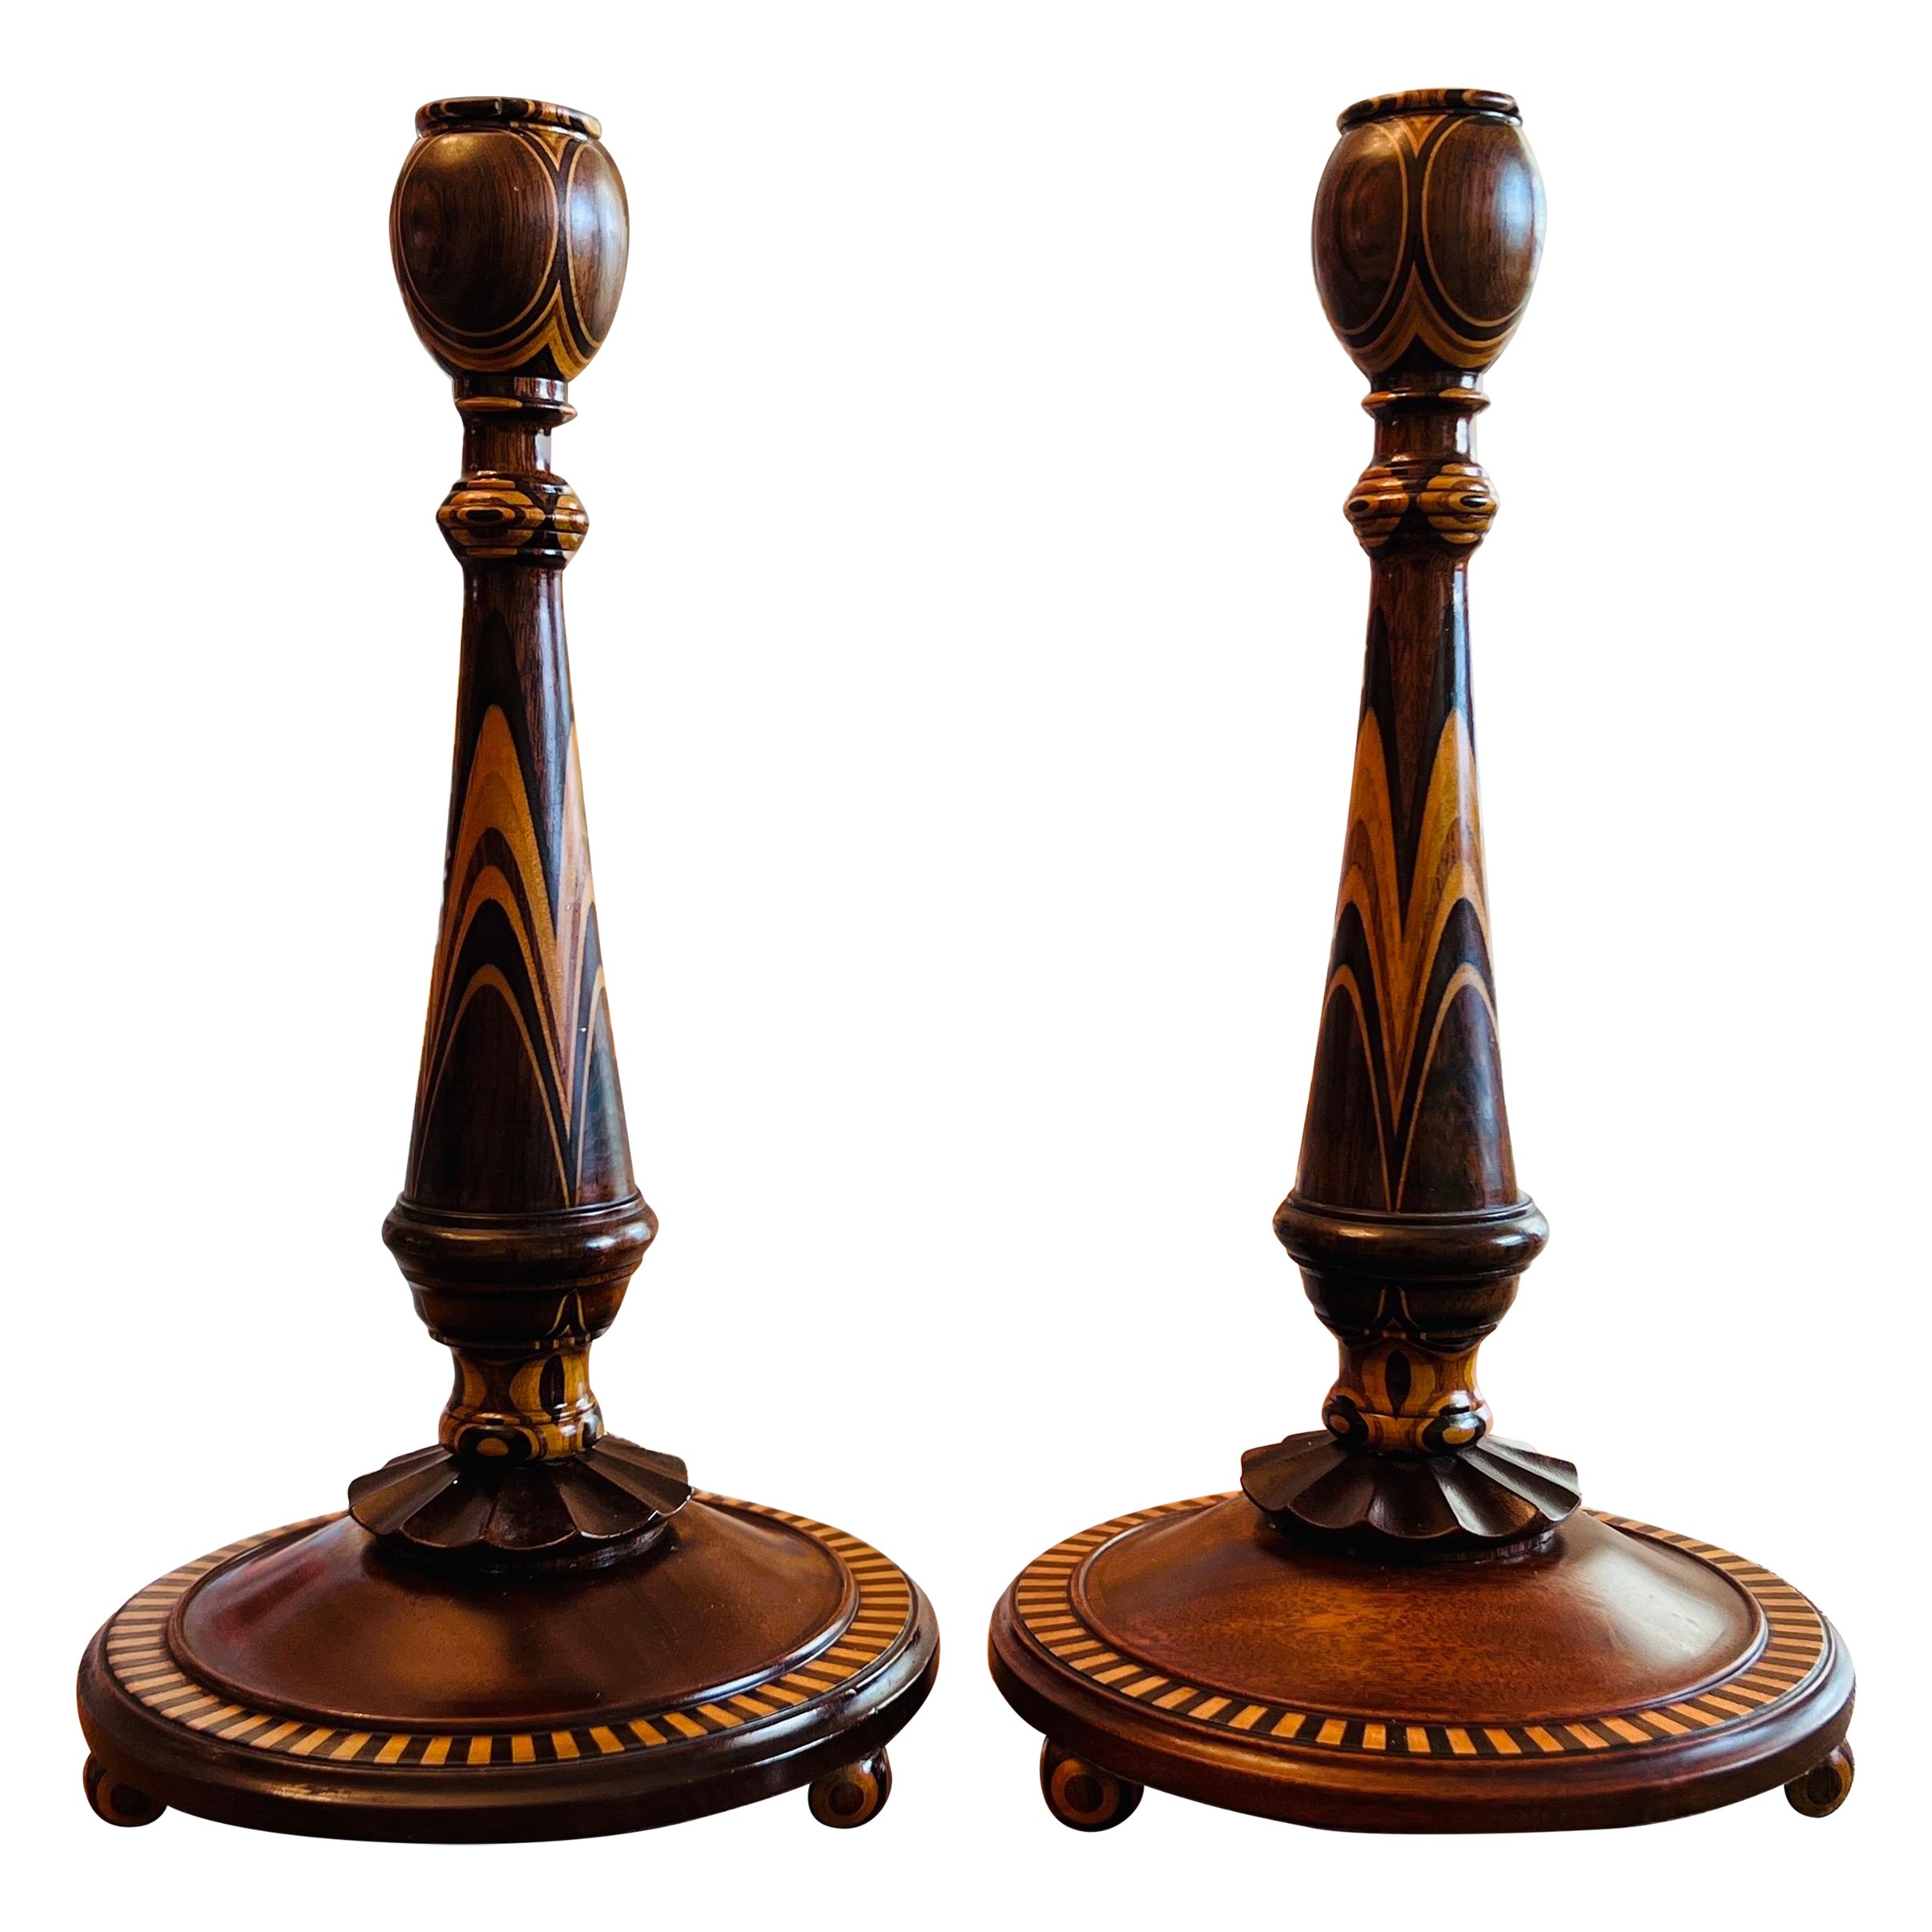 Fine American Turned Walnut & Mixed Marquetry Wood Candlesticks, circa 1925